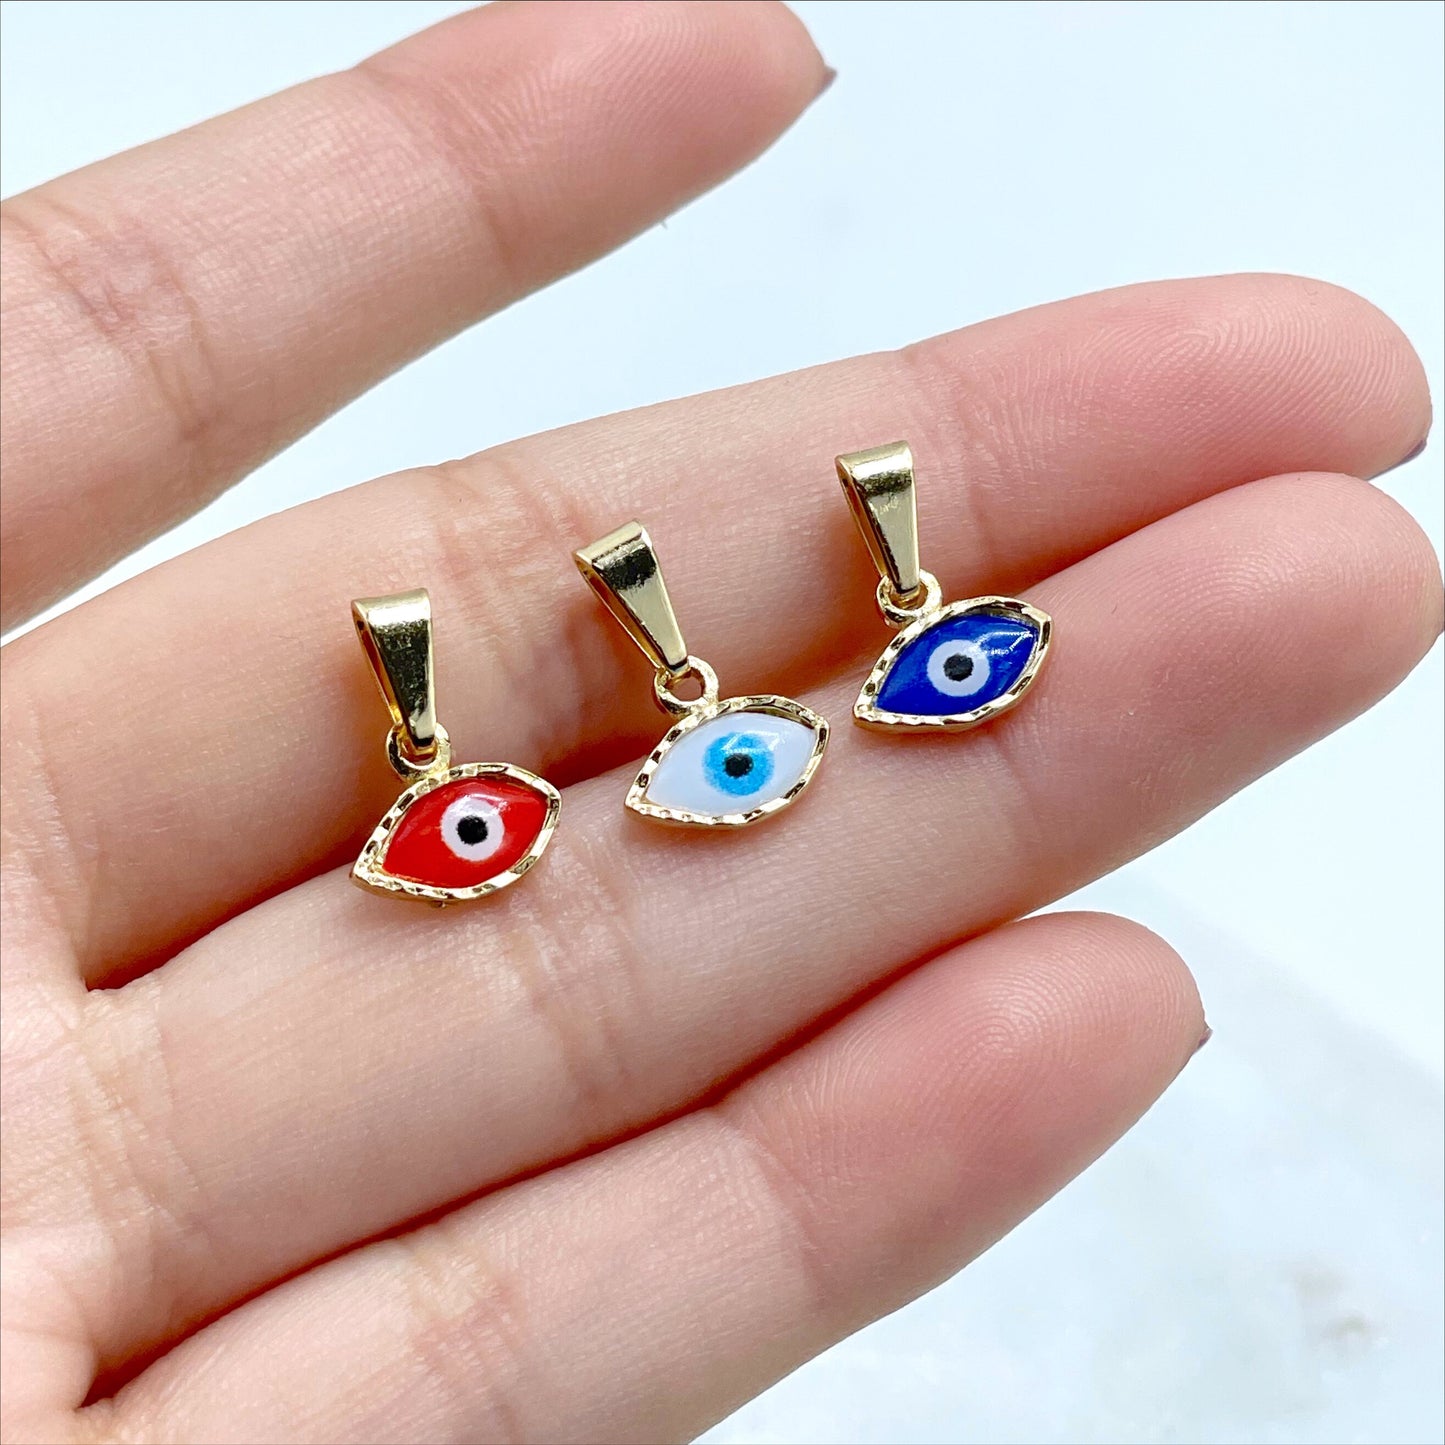 18k Gold Filled Enamel Red, White or Blue, Pettie Evil Eye Shape Charms Pendant, Lucky & Protection Jewelry, Wholesale Jewelry Supplies